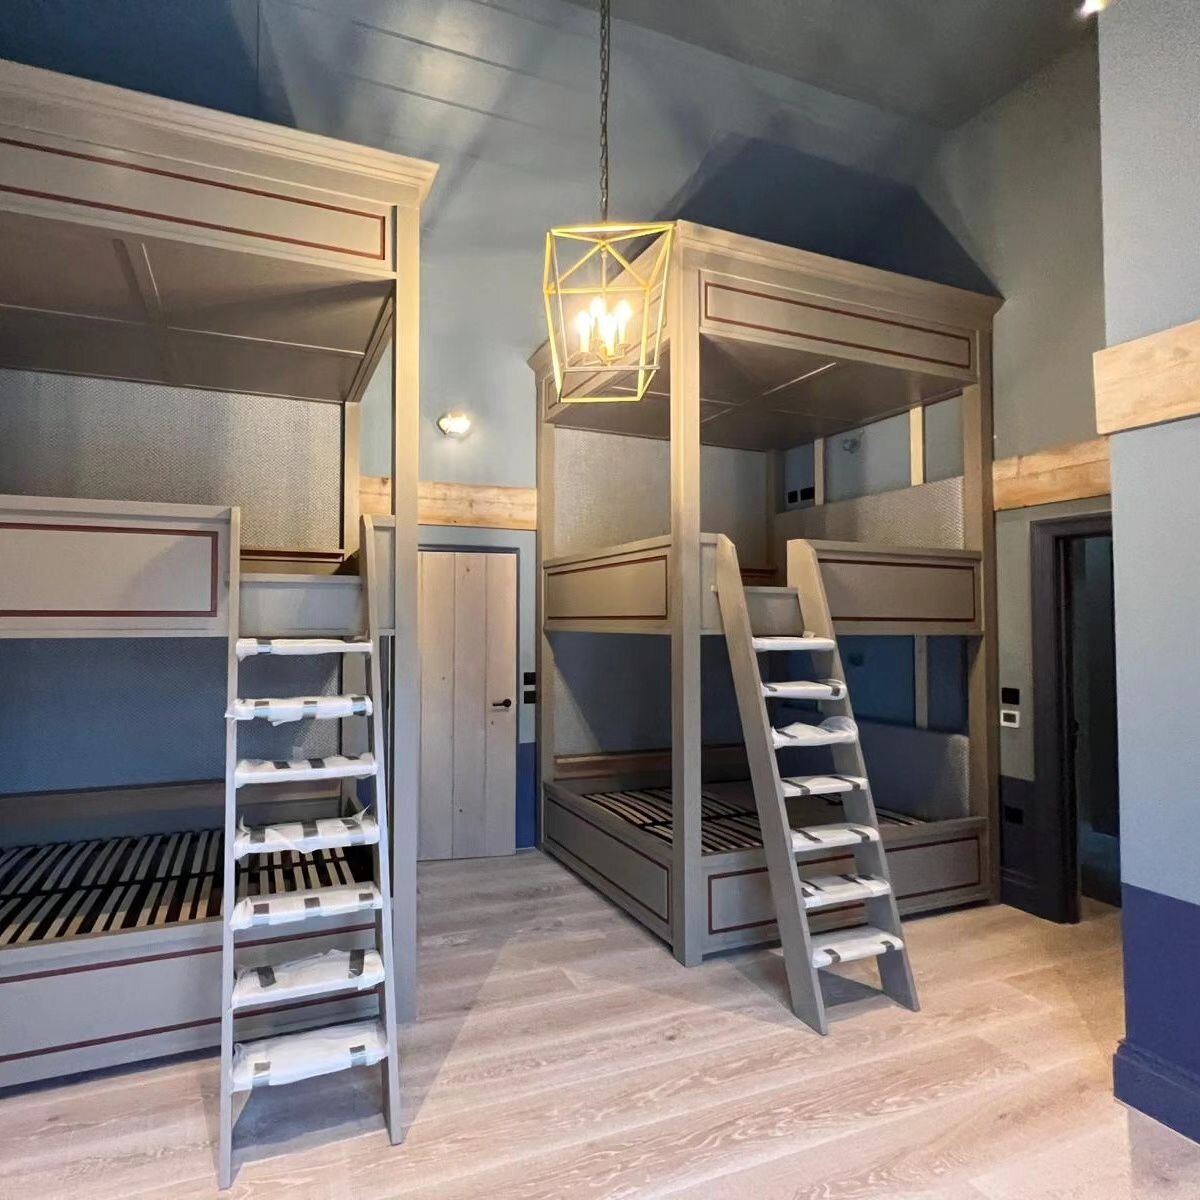 Overjoyed to finally share these installation photographs. 
Concept to Completion stayed tight.
Four queen sized beds, a room fit for Eight! On the architects drawing board this single story room started out with a flat ceiling and not much joy. So v